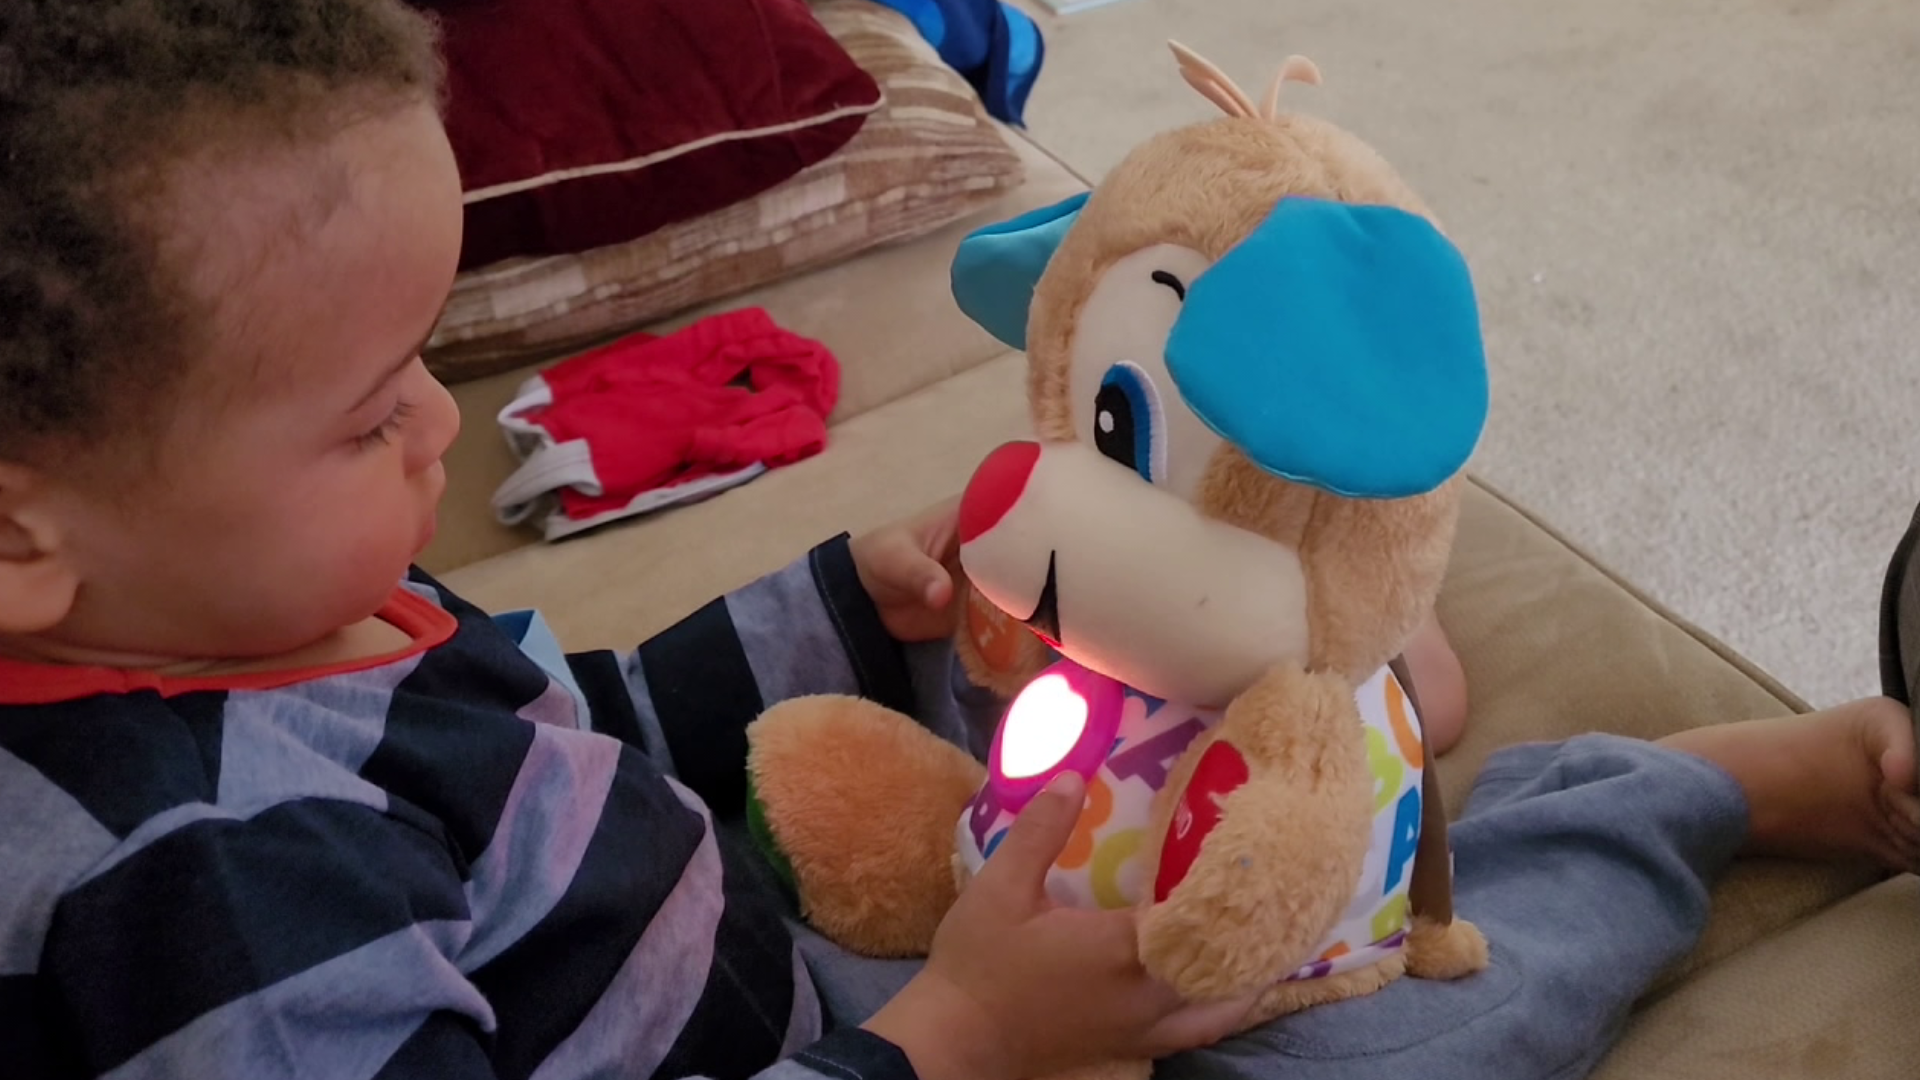 The maker claims the soft, cuddly toys will make learning fun by responding to your baby's touch with songs and phrases.